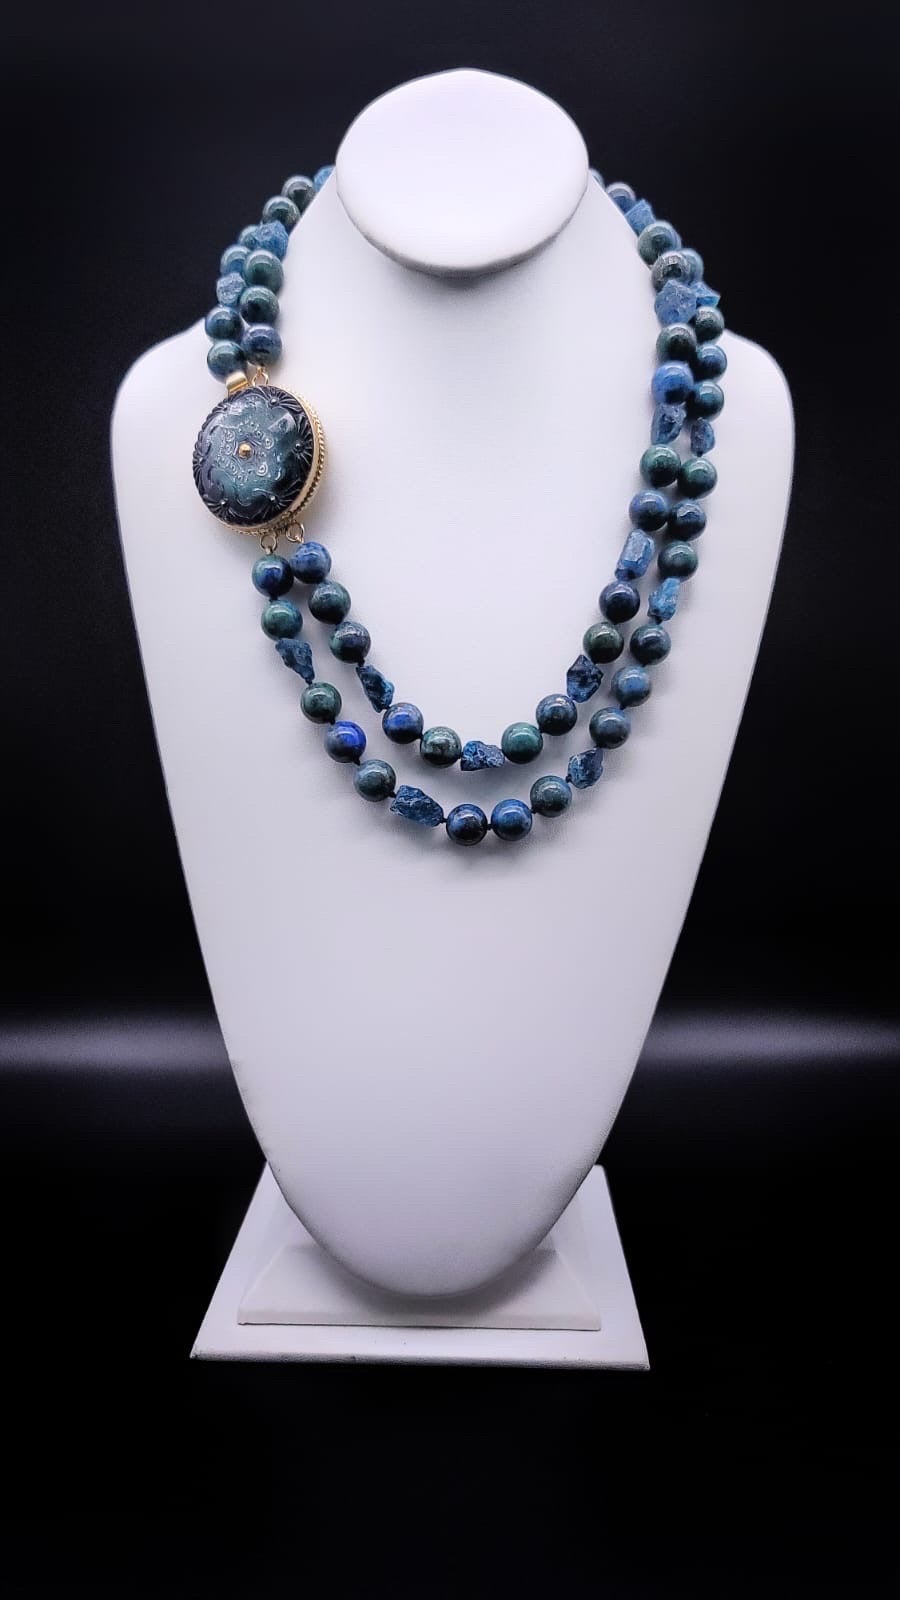 A.Jeschel Captivating Chrysocolla and Apatite necklace